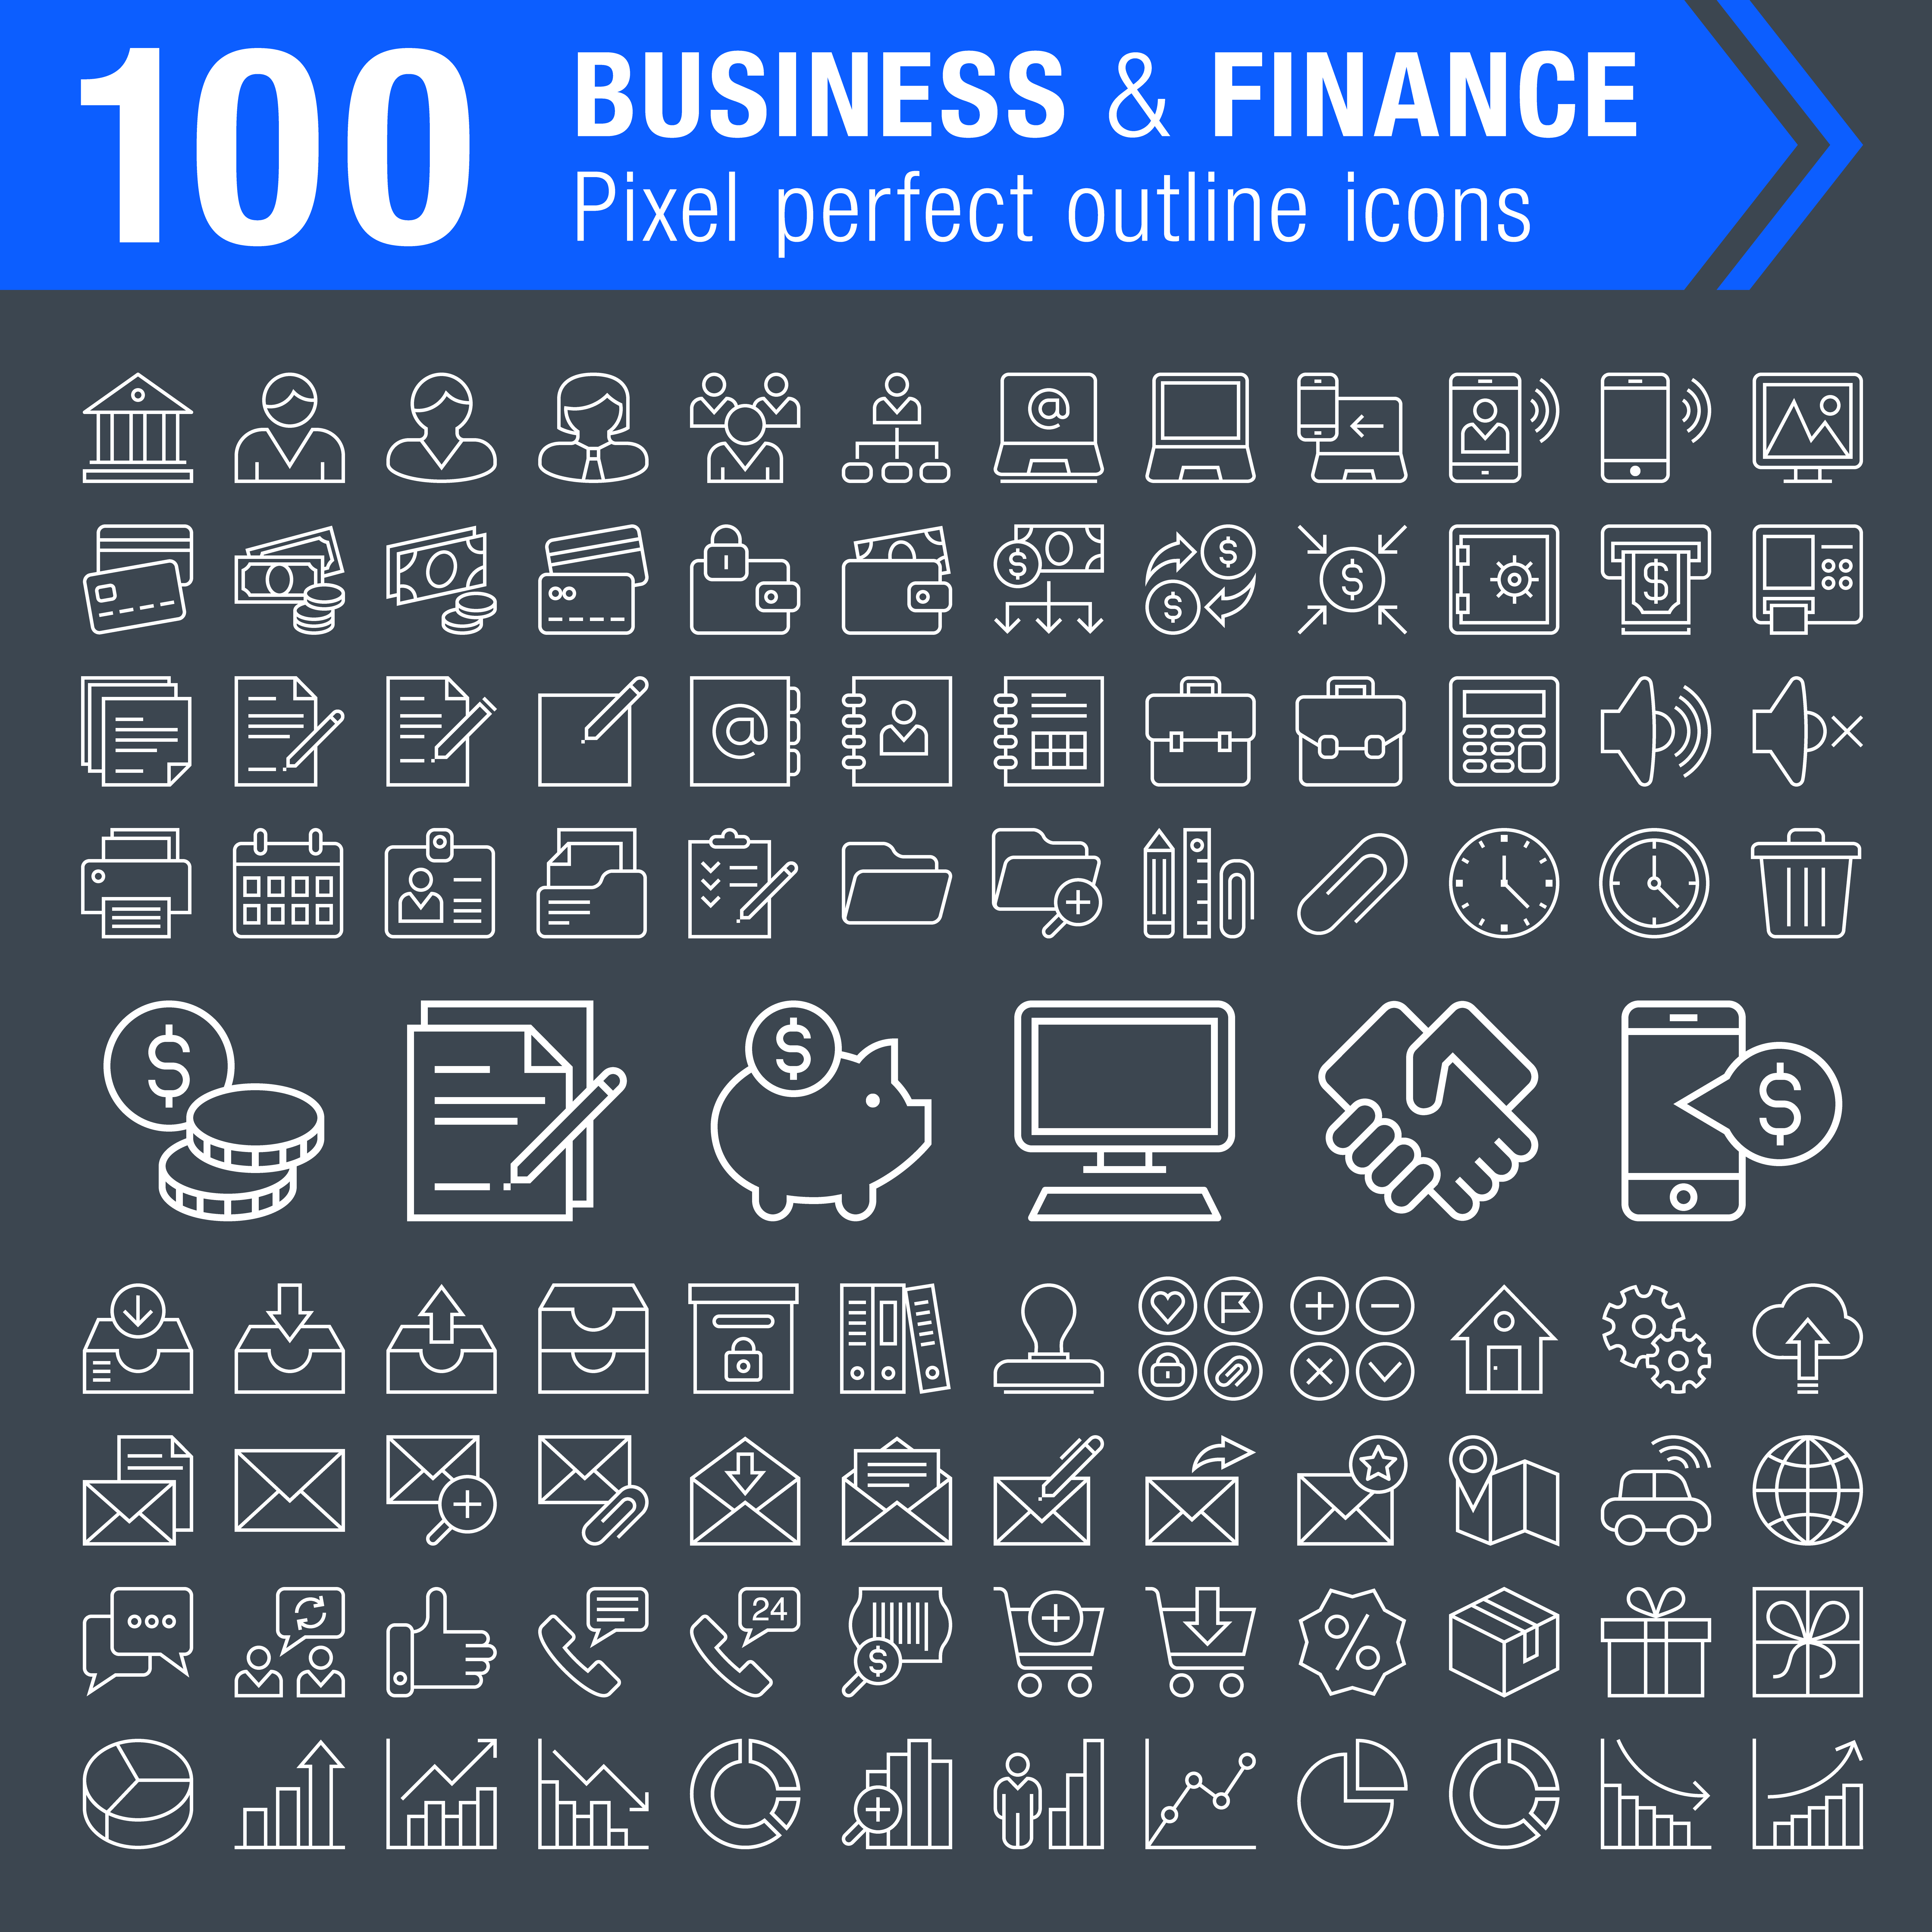 100 business and finance icons